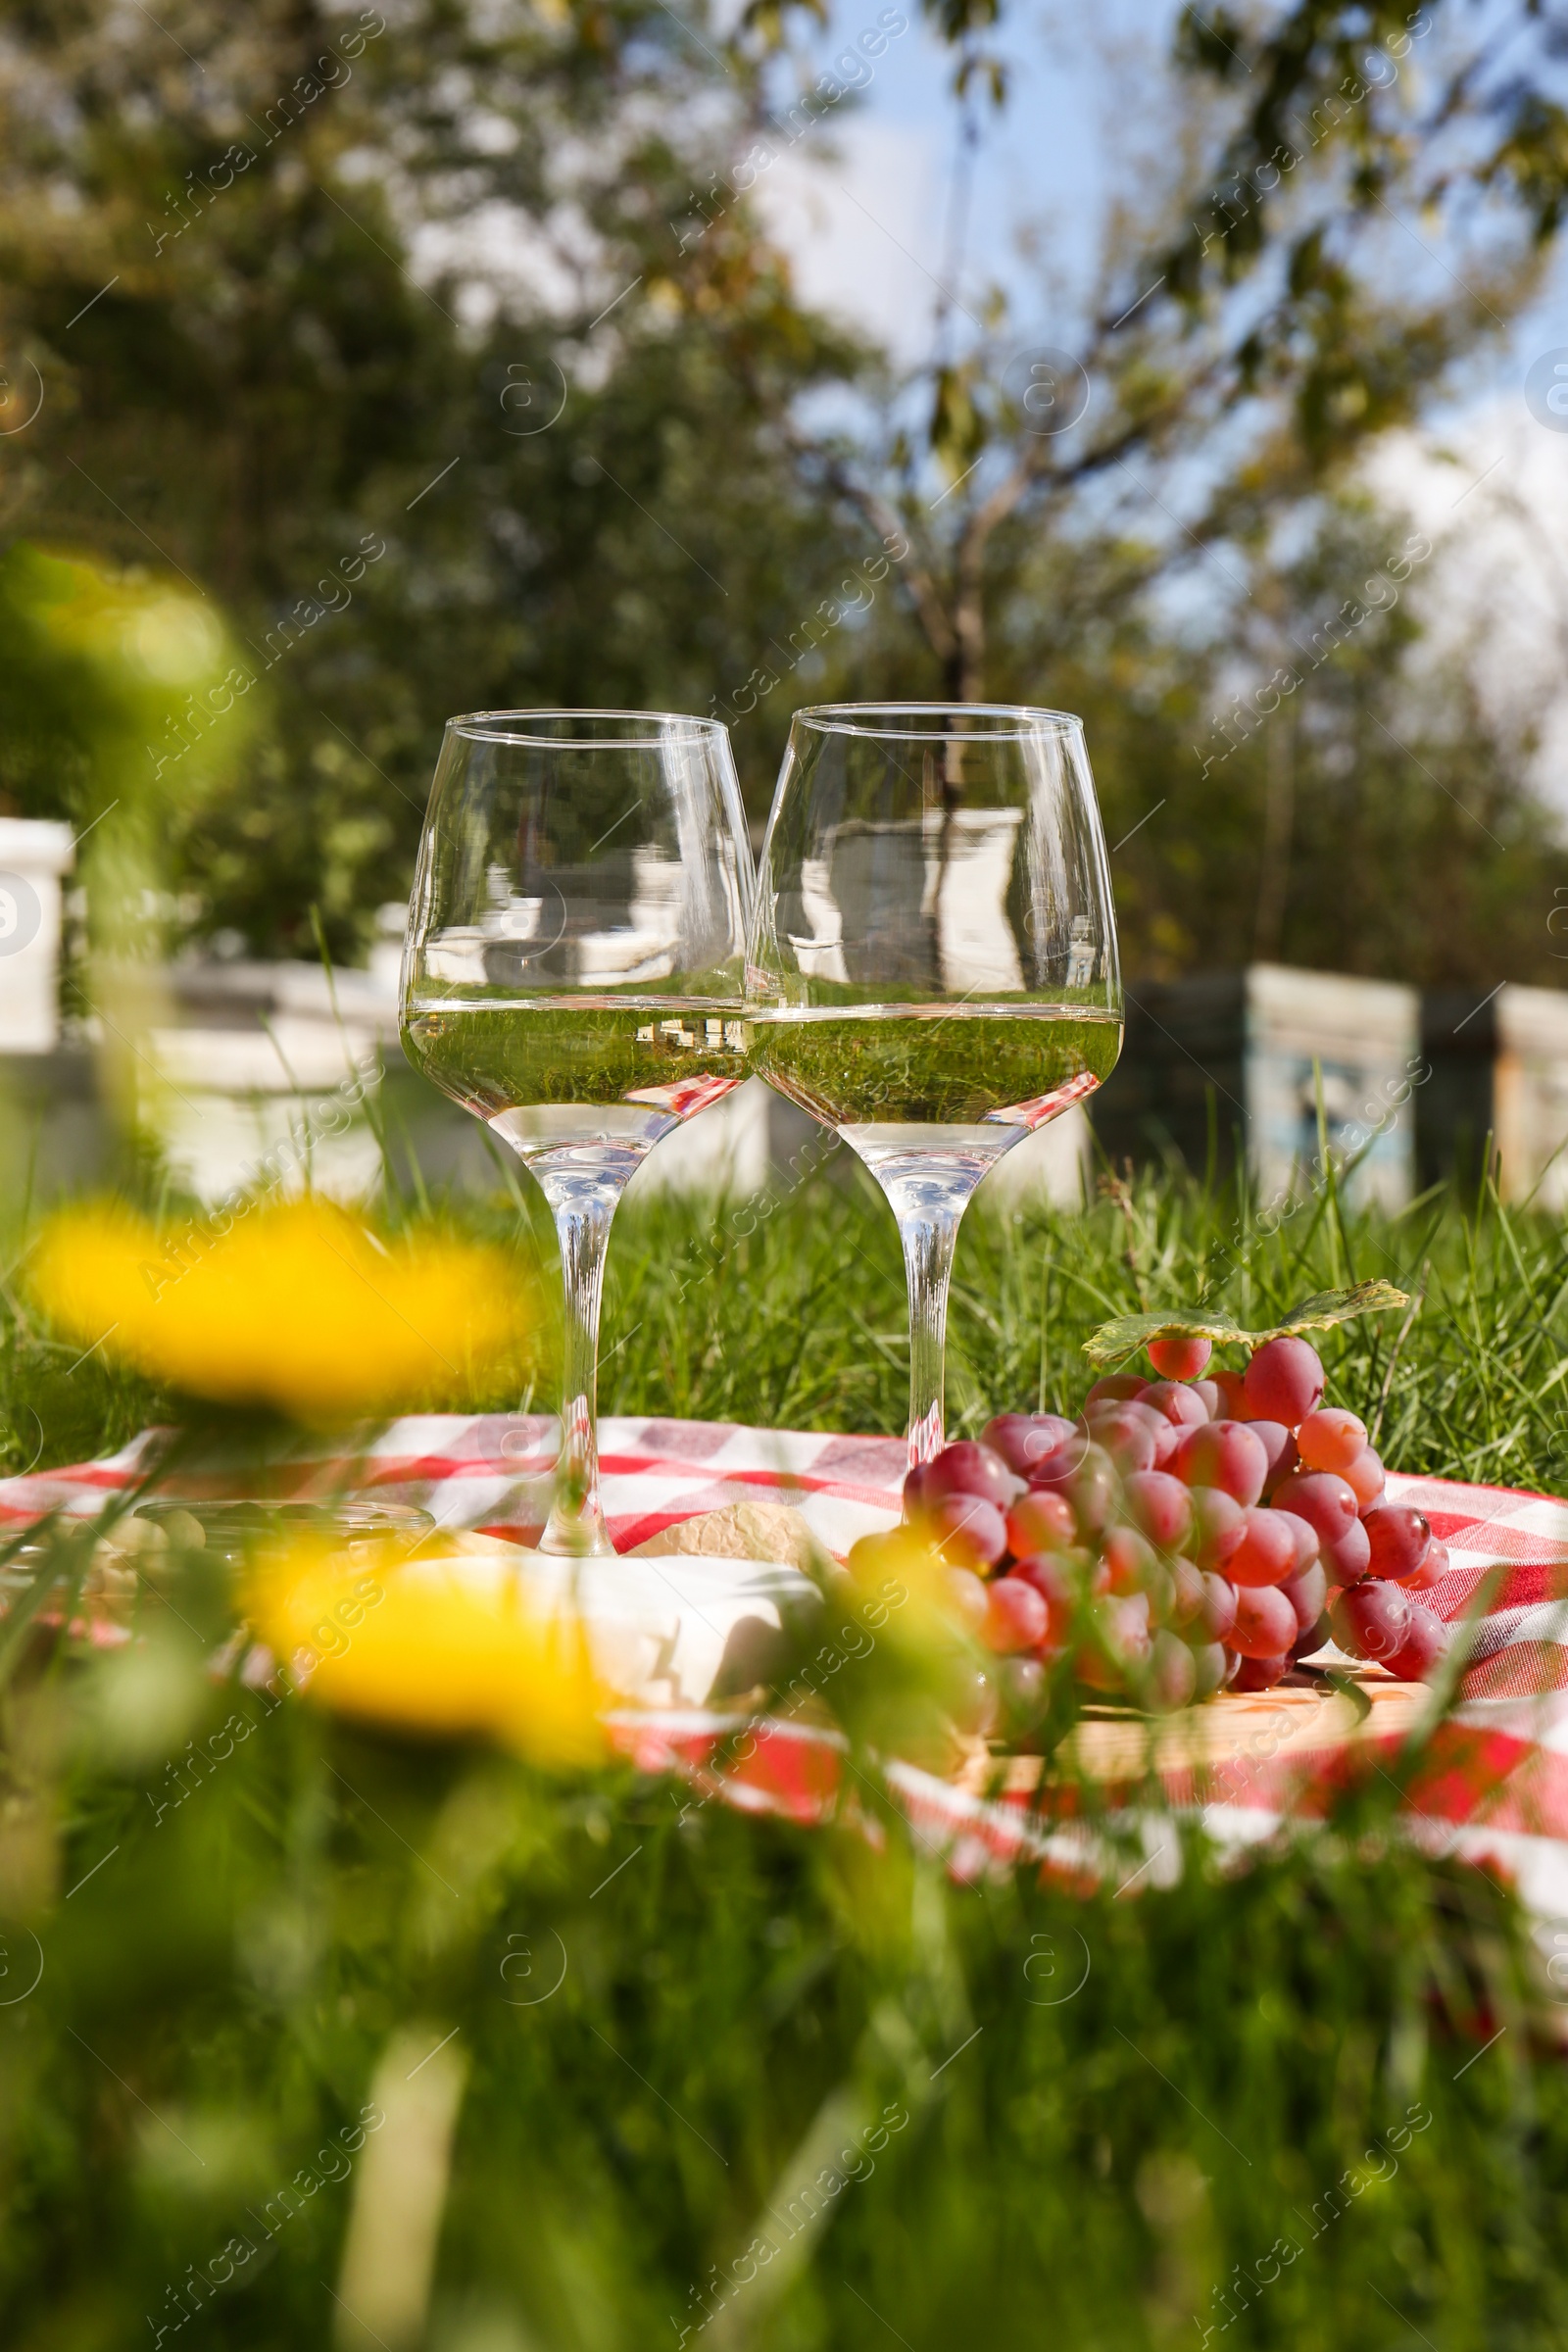 Photo of Glasses of white wine and snacks for picnic served on blanket near apiary